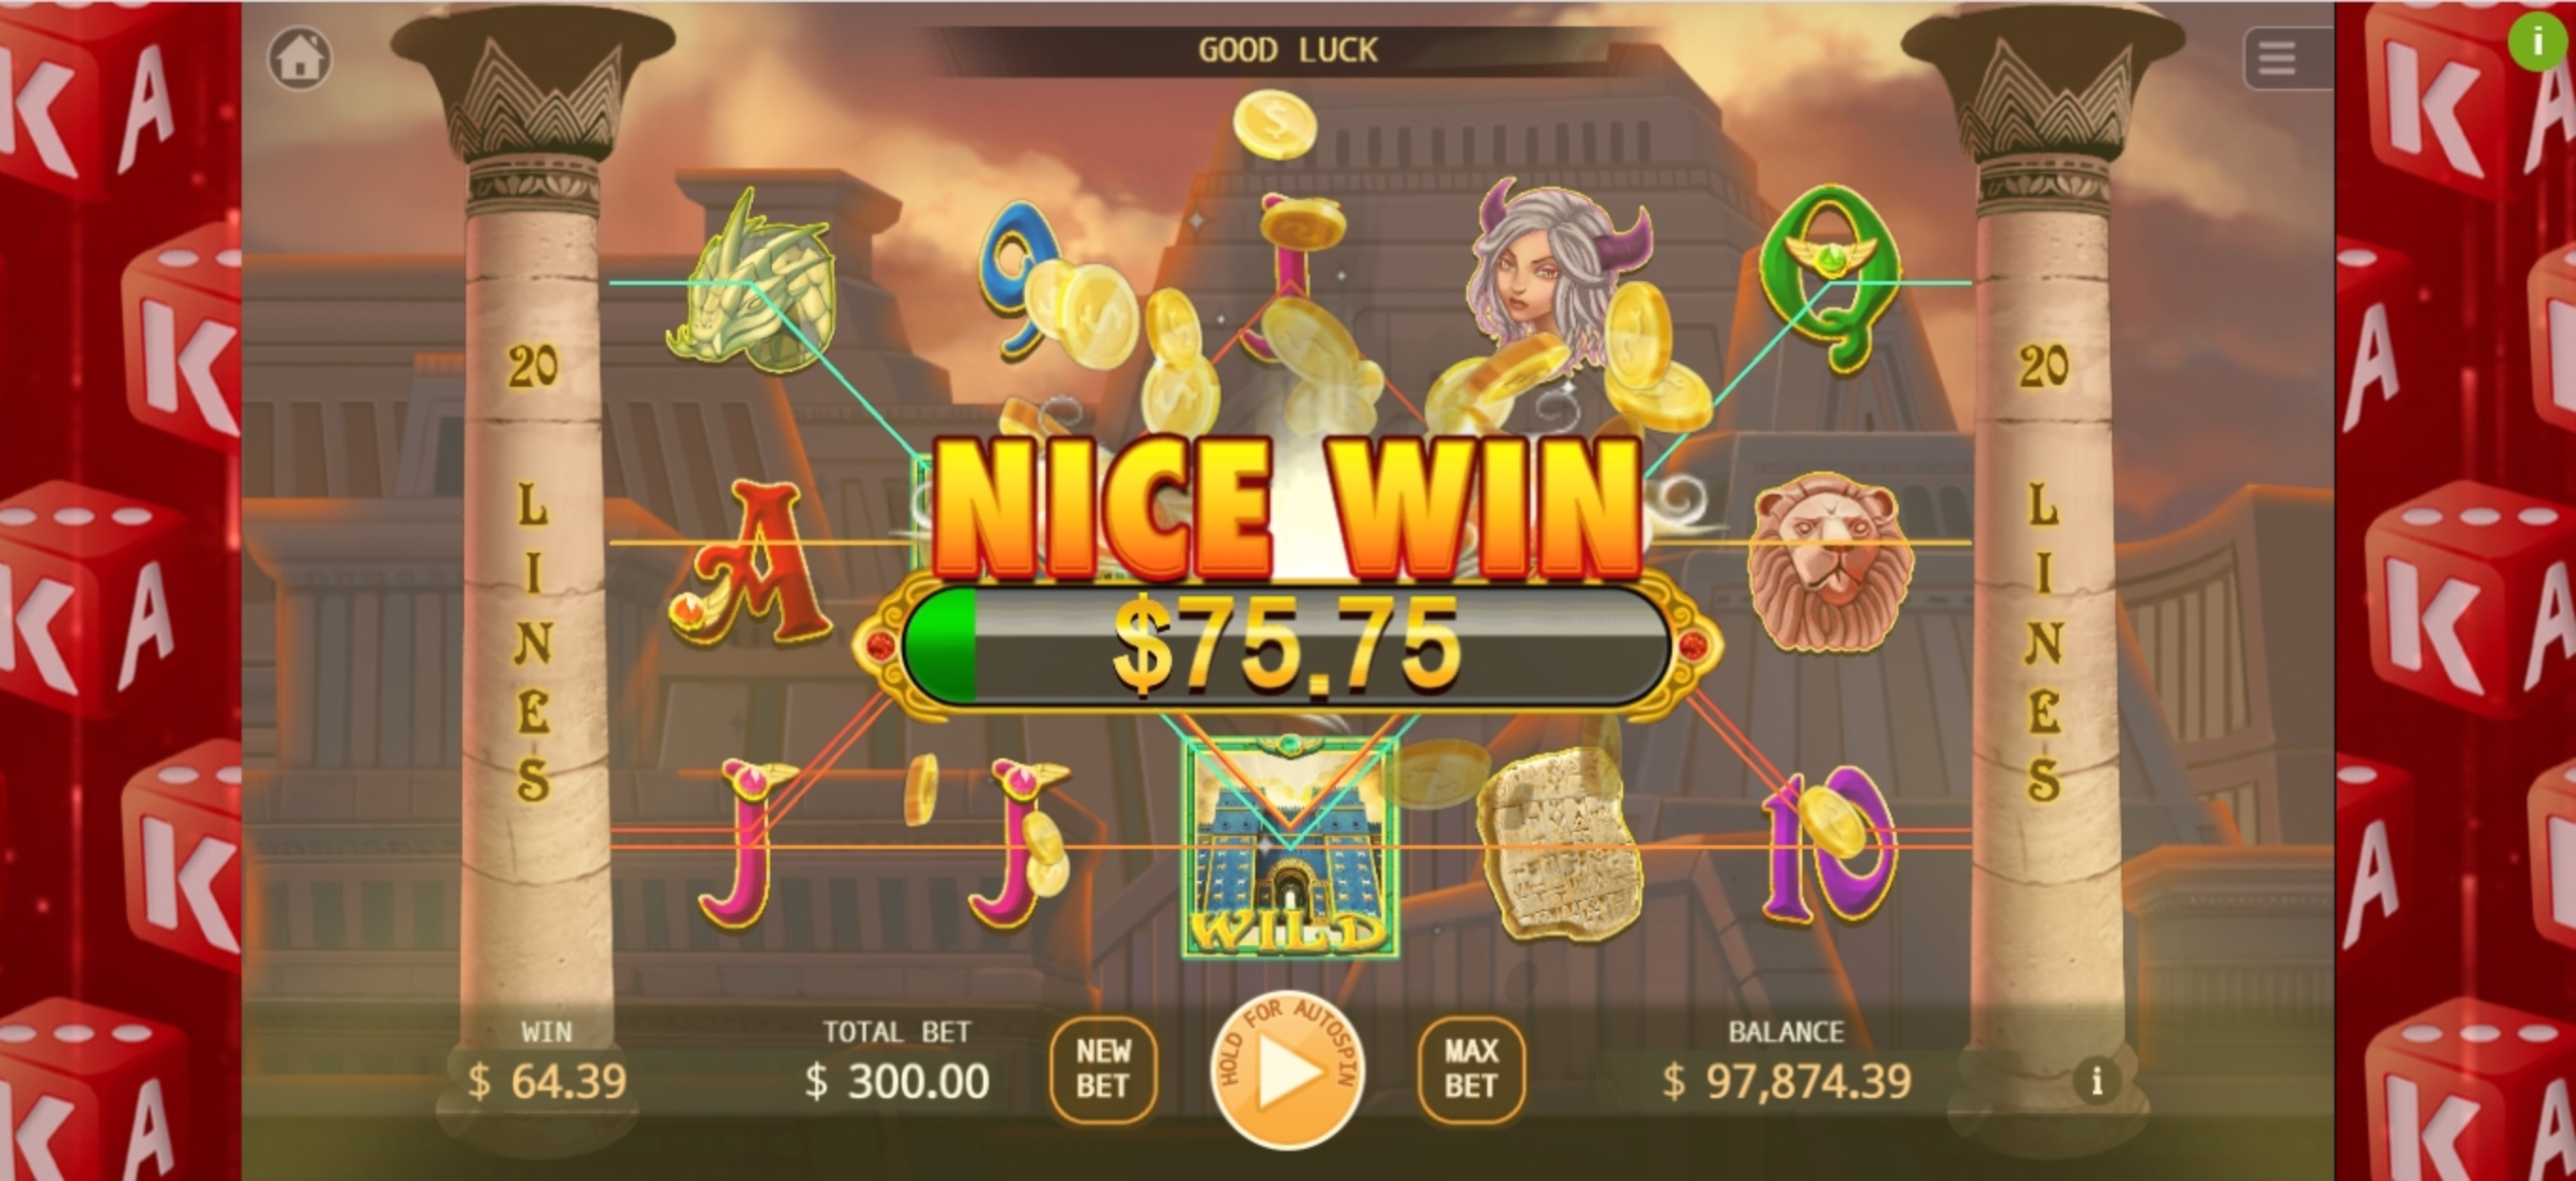 Win Money in Tower of Babel Free Slot Game by KA Gaming